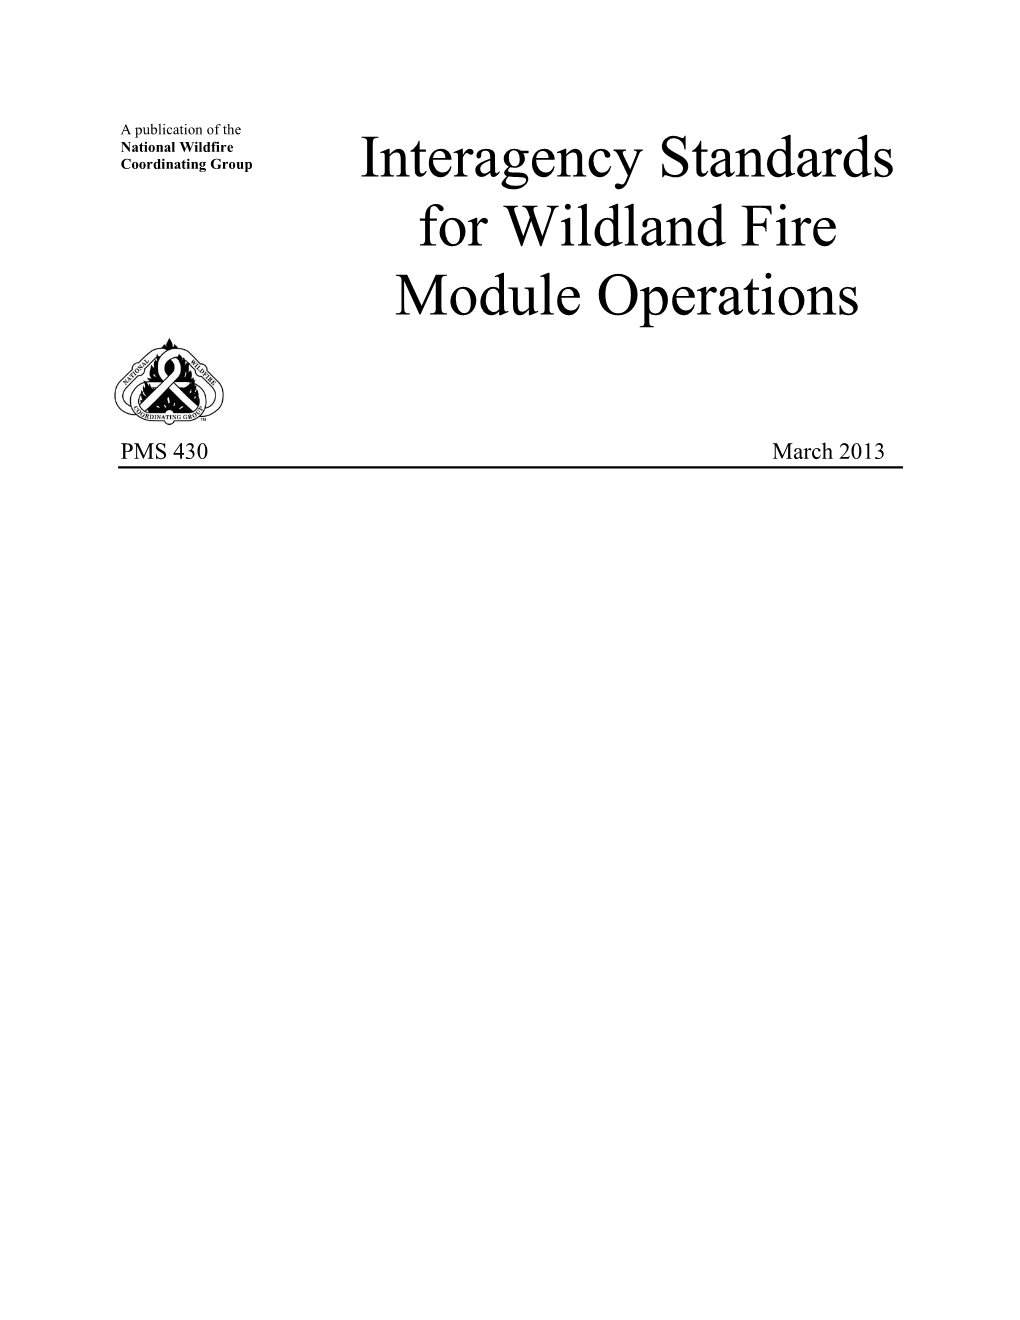 Interagency Standards for Wildland Fire Module Operations